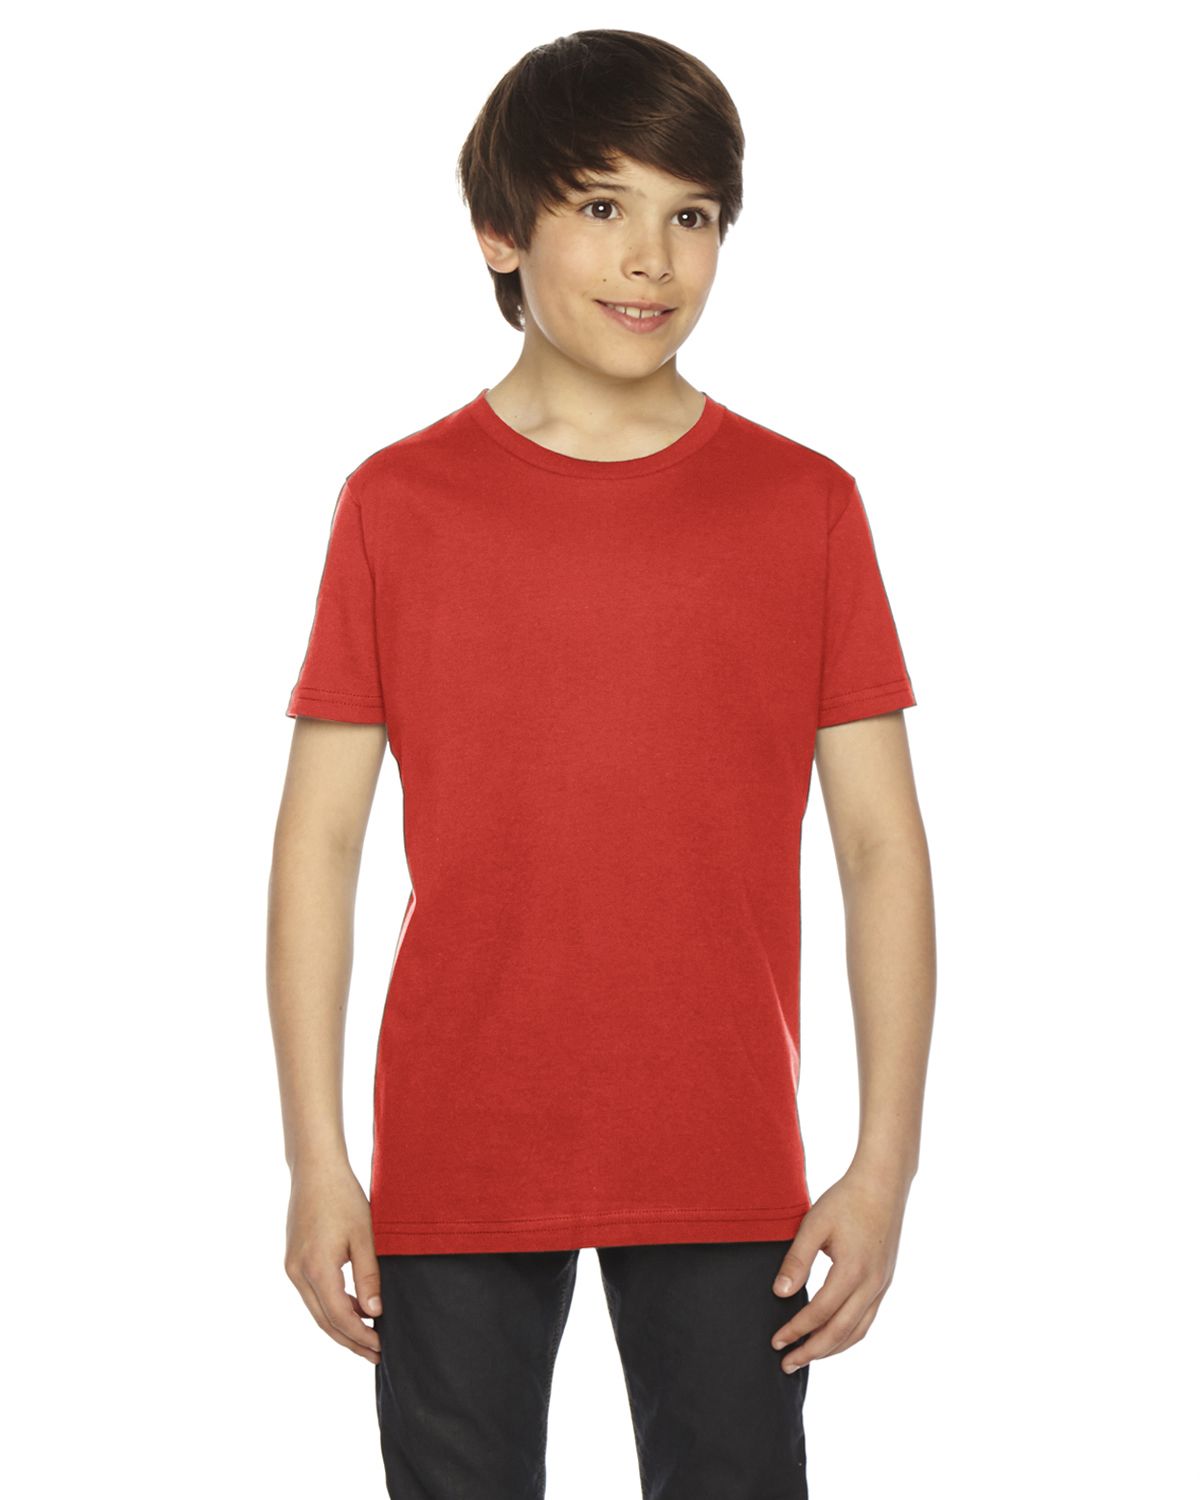 American Apparel Youth Fine Jersey Short-sleeve T-shirt